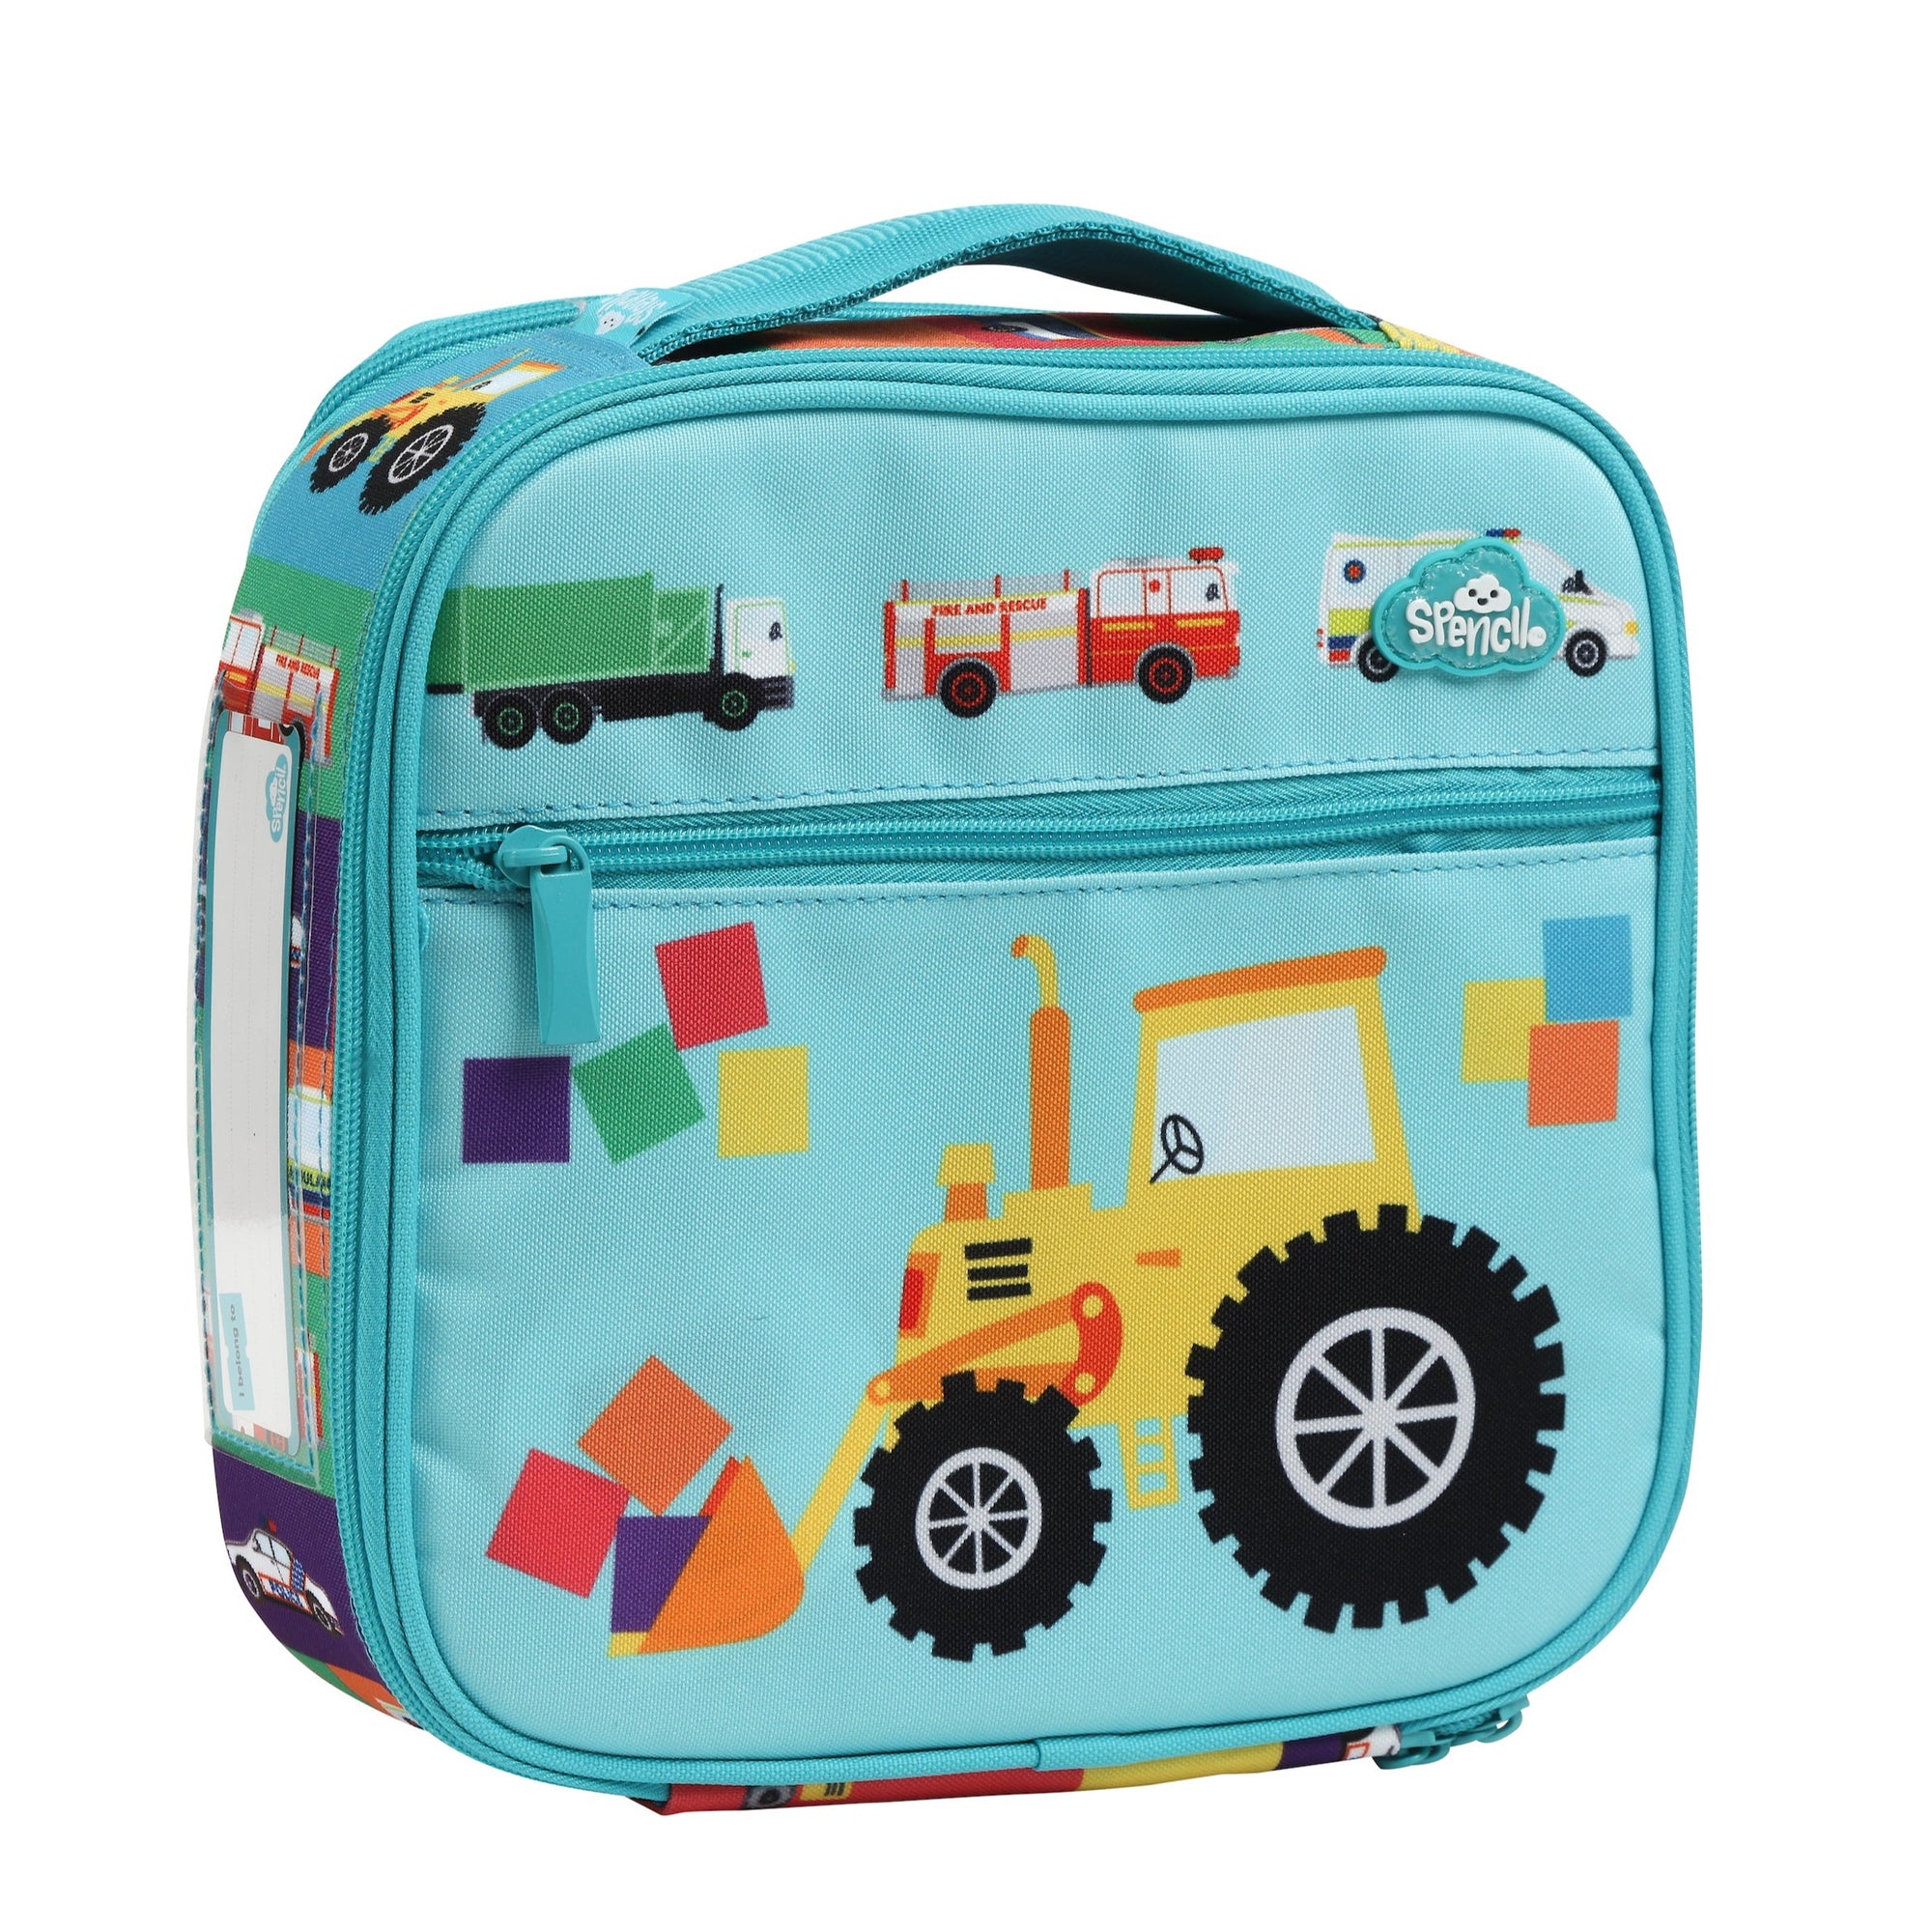 Kids insulated lunch box - angus and dudley